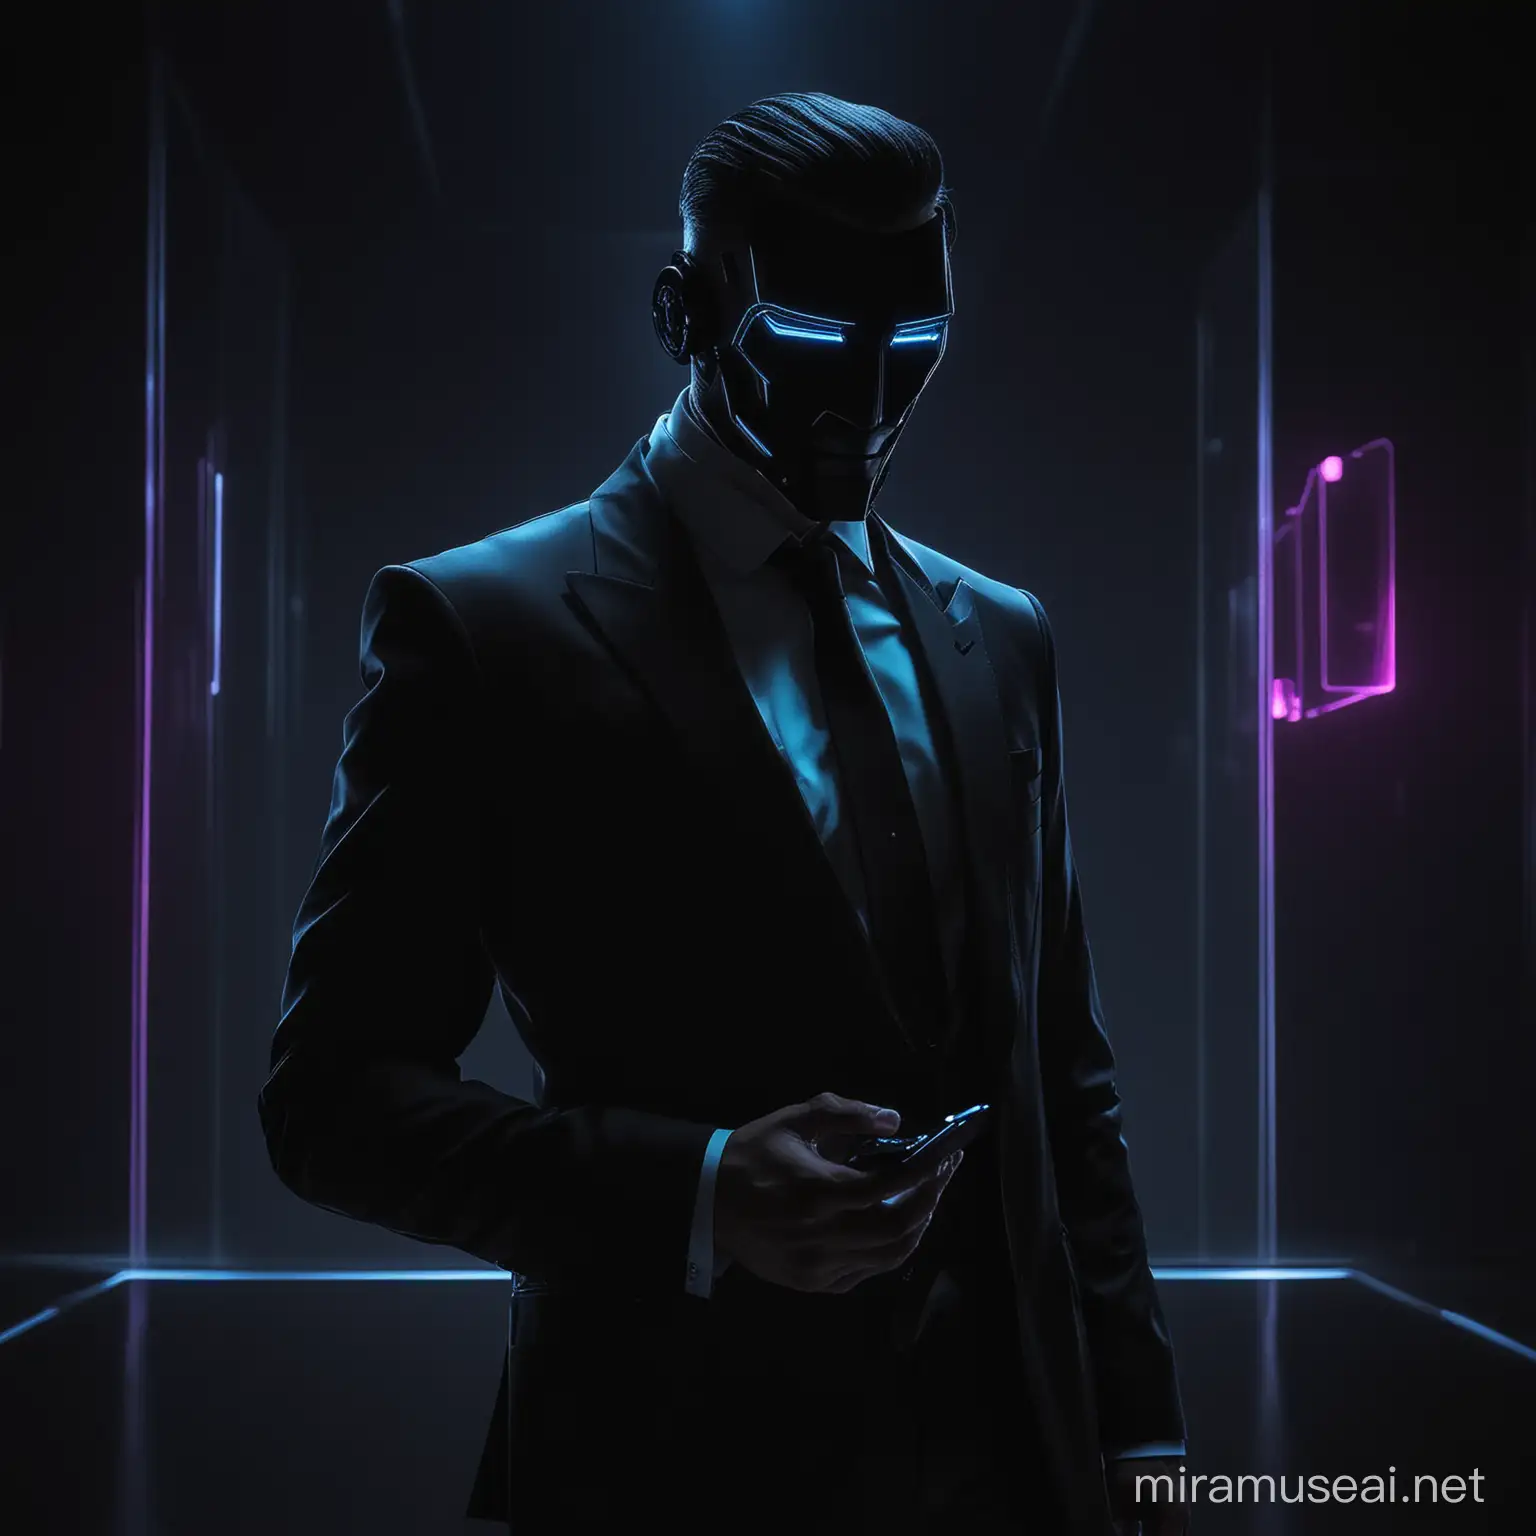 Mysterious Boss in Modern Futuristic Tuxedo with Black Lights No Smartphone